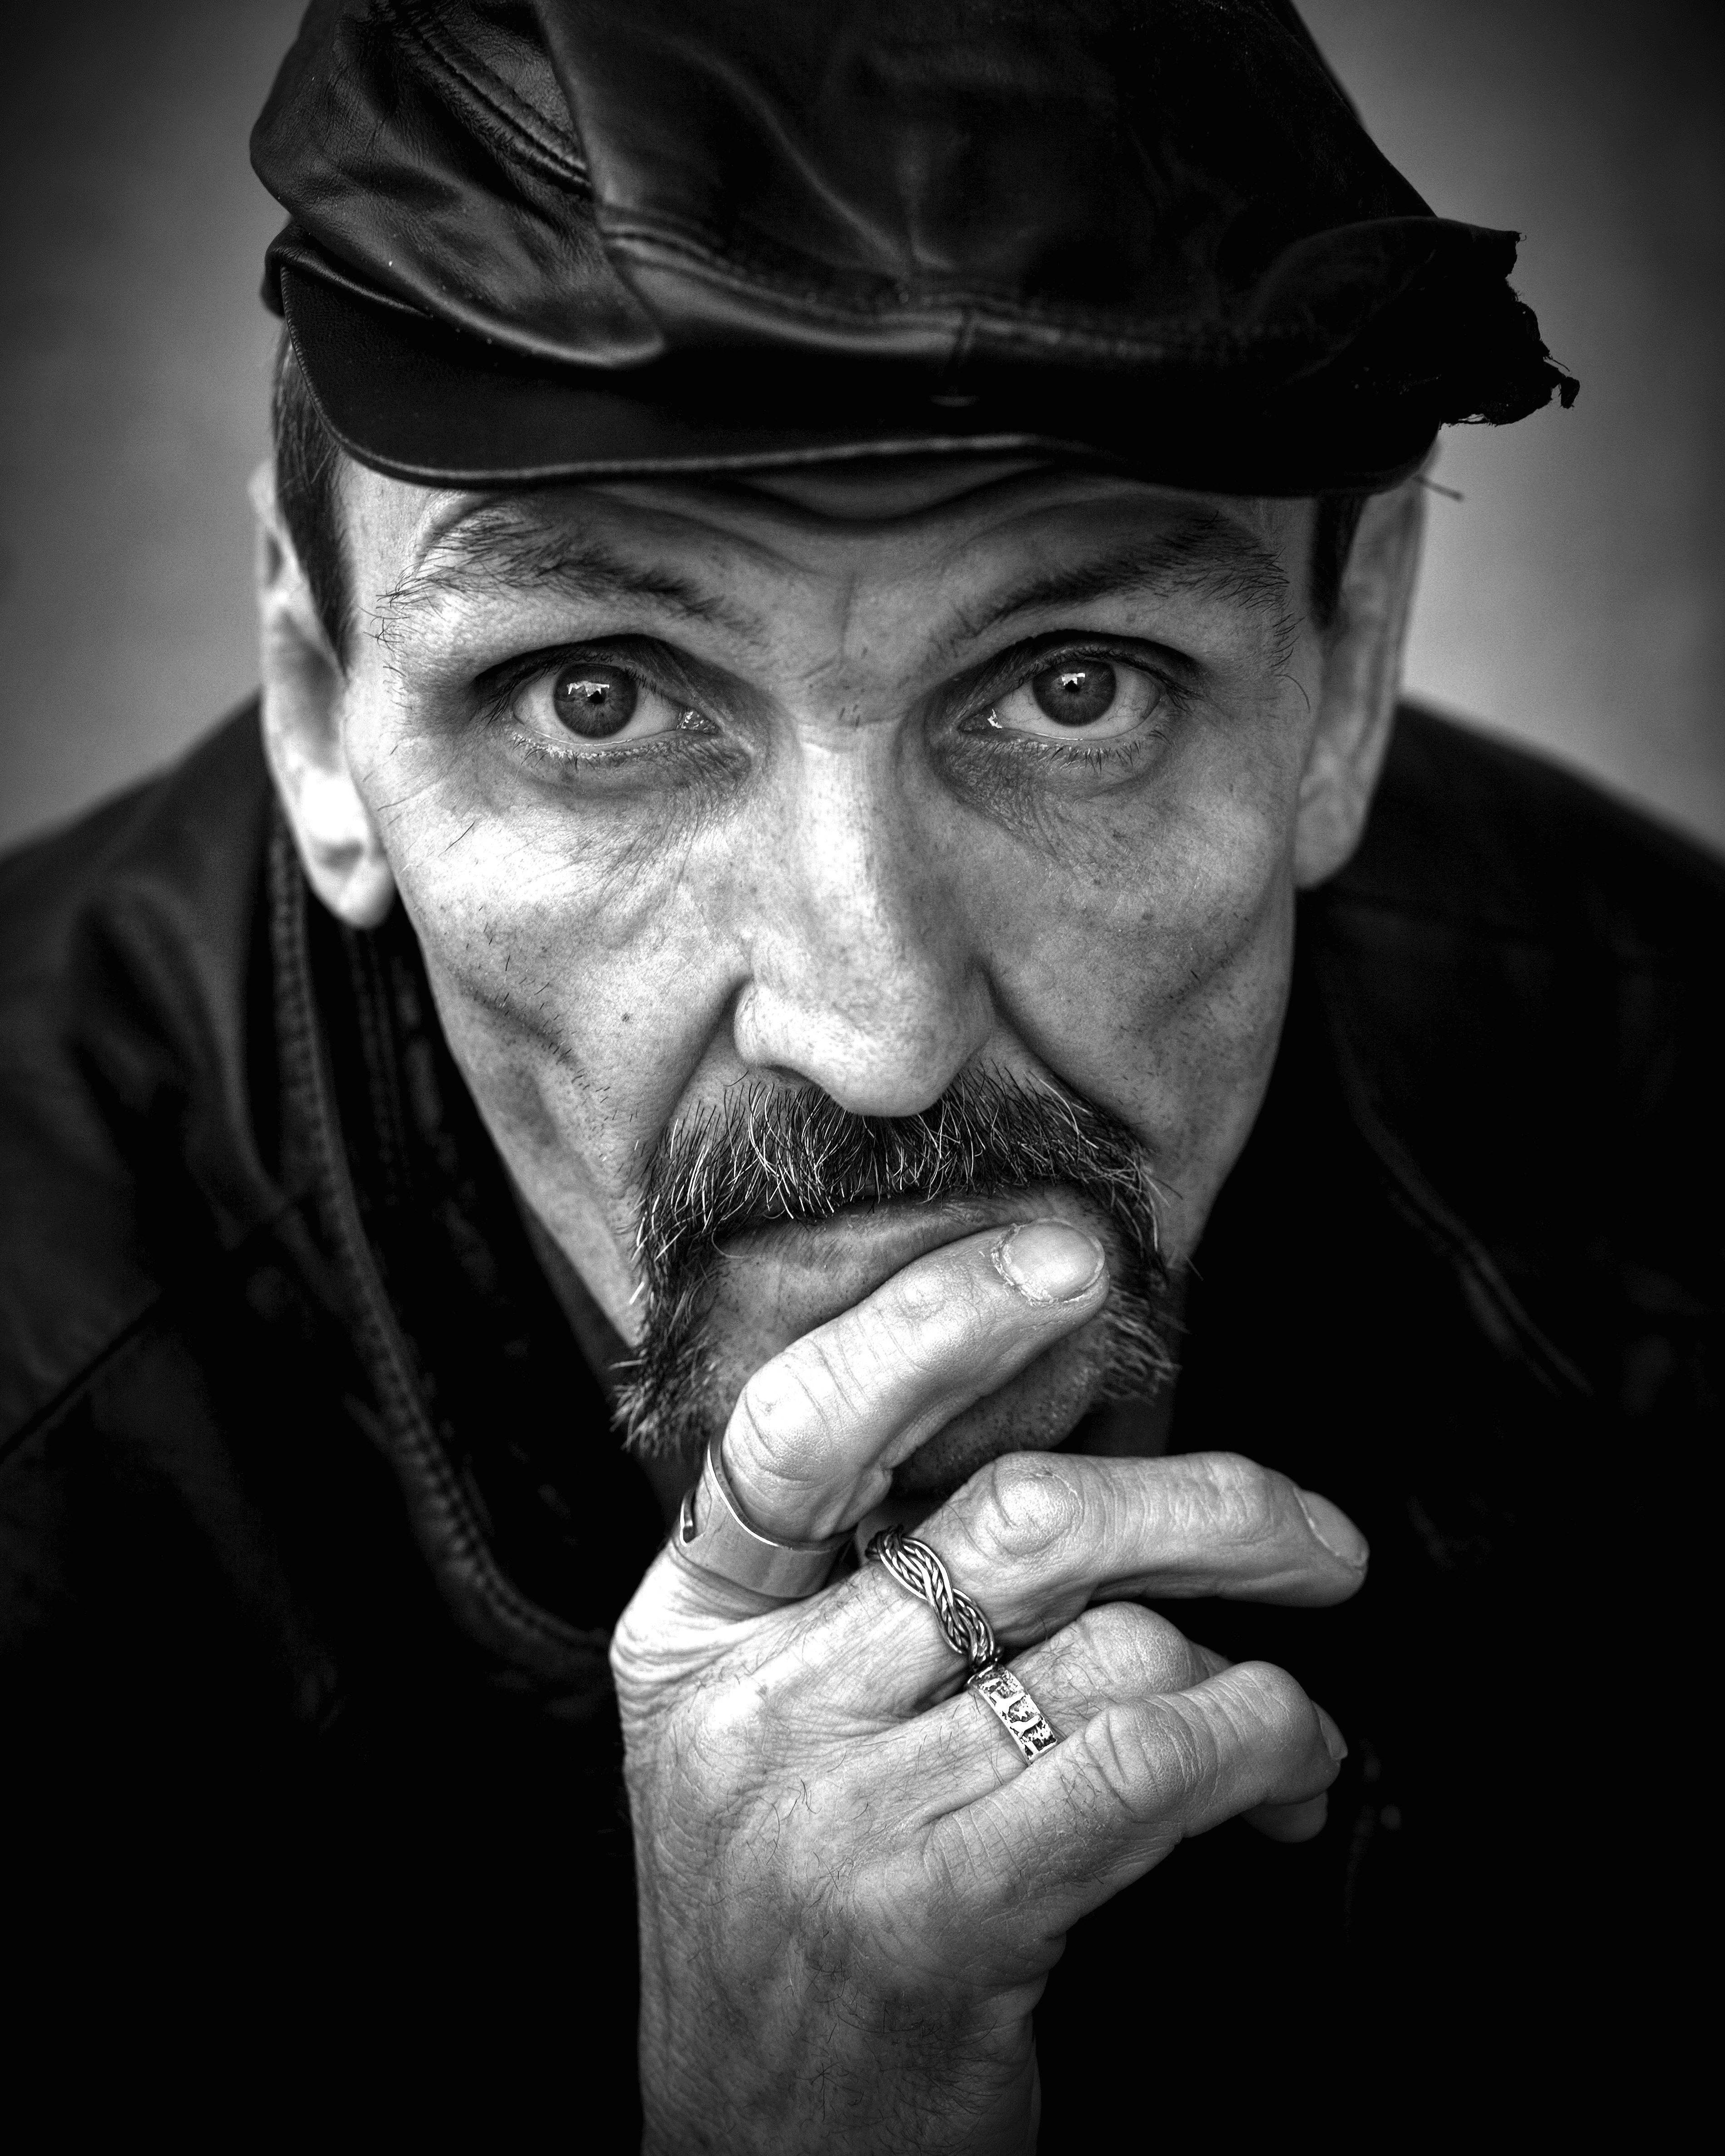 Free picture: man portrait, photo model, old person, hat, grayscale